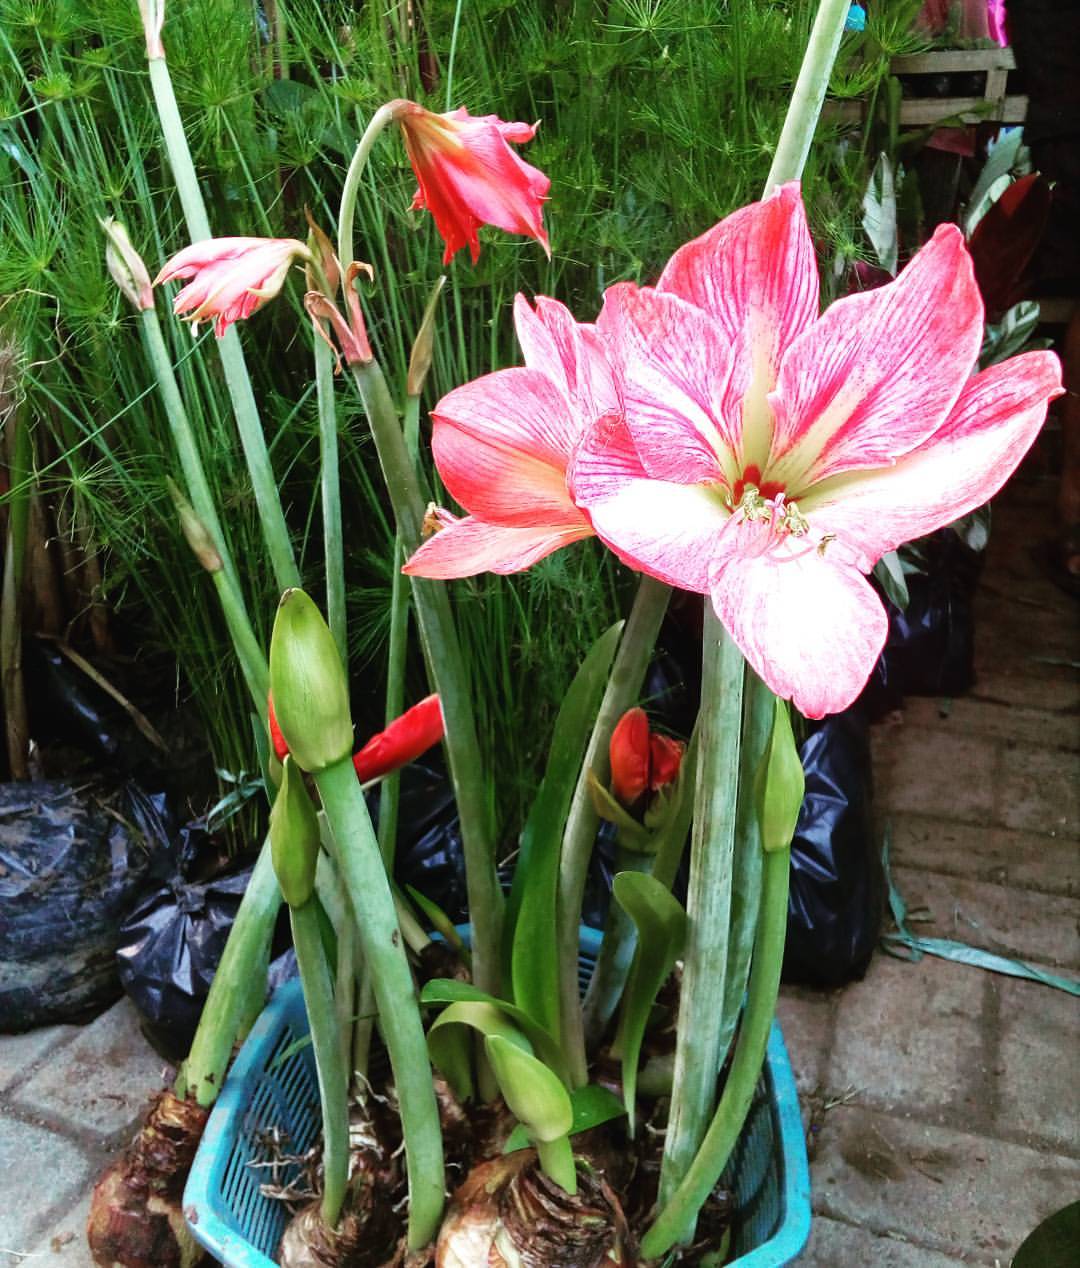 how do you spell amaryllis flower